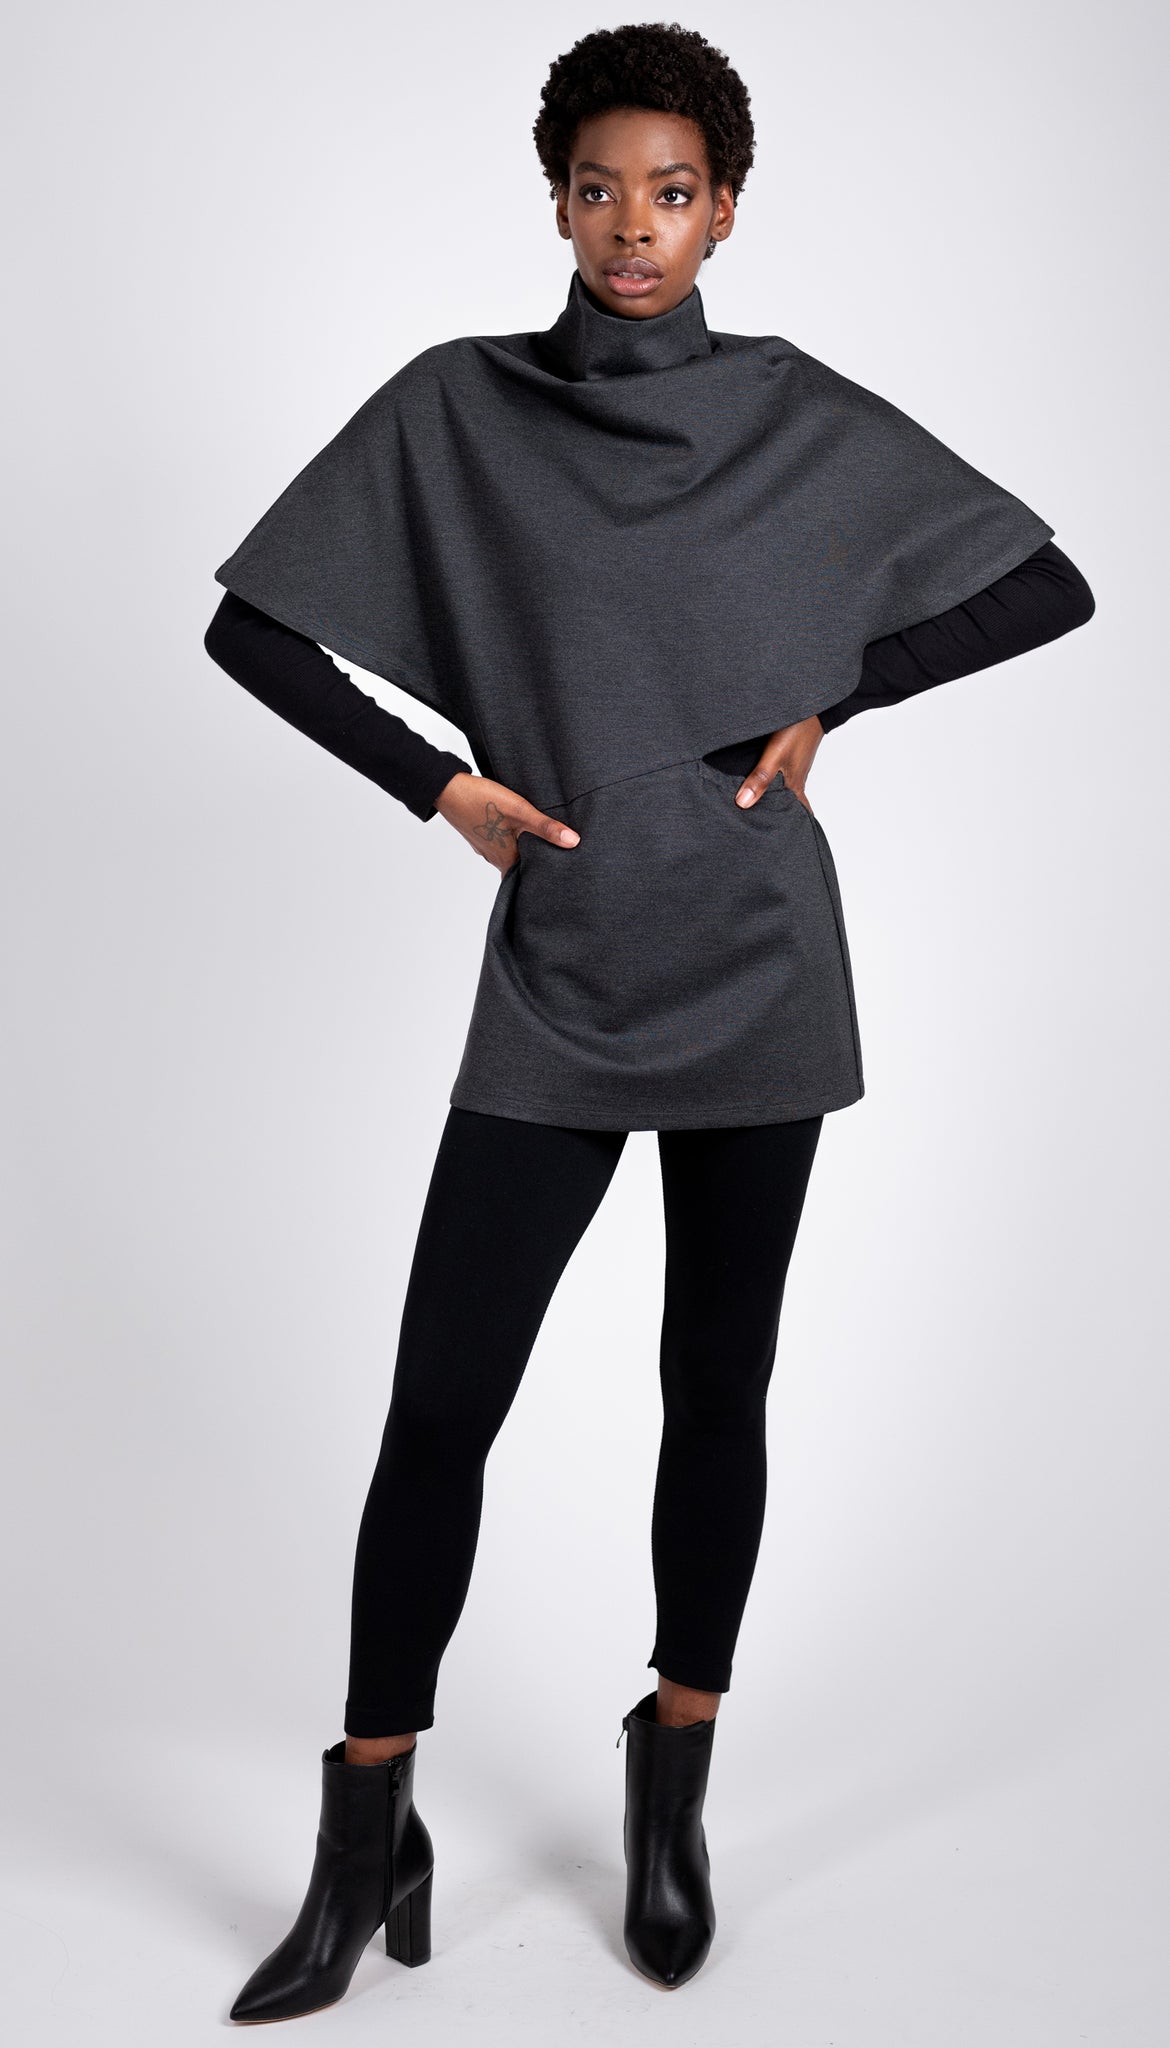 Poncho Tunic Top/ Black and Grey Ponte Knit